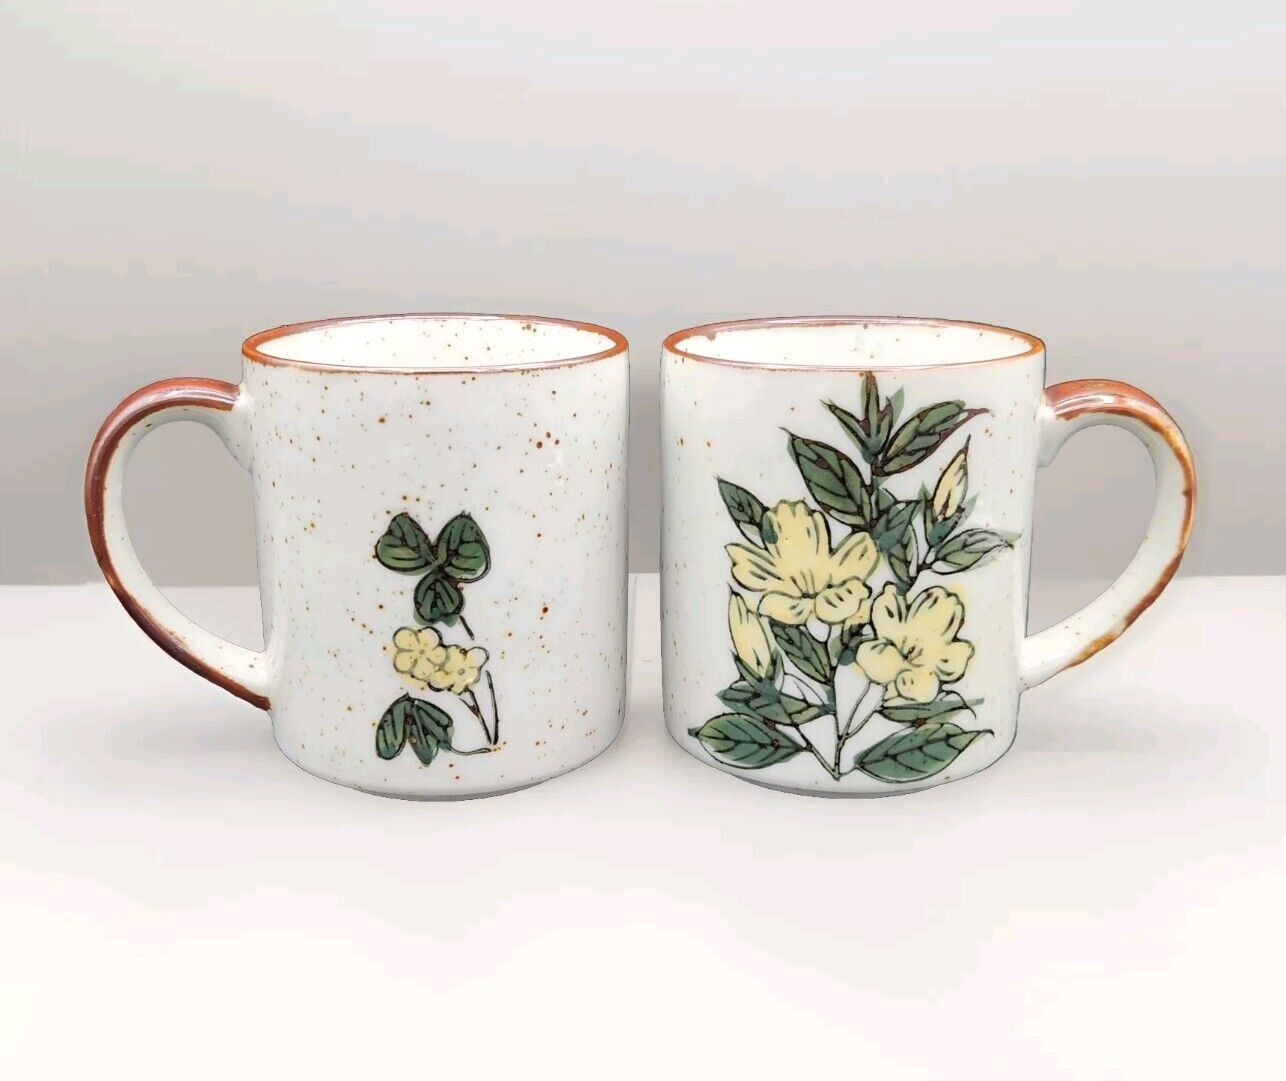 VTG Set Of 2 Otagiri Style Speckled Stoneware Yellow Floral Coffee Mugs Japan